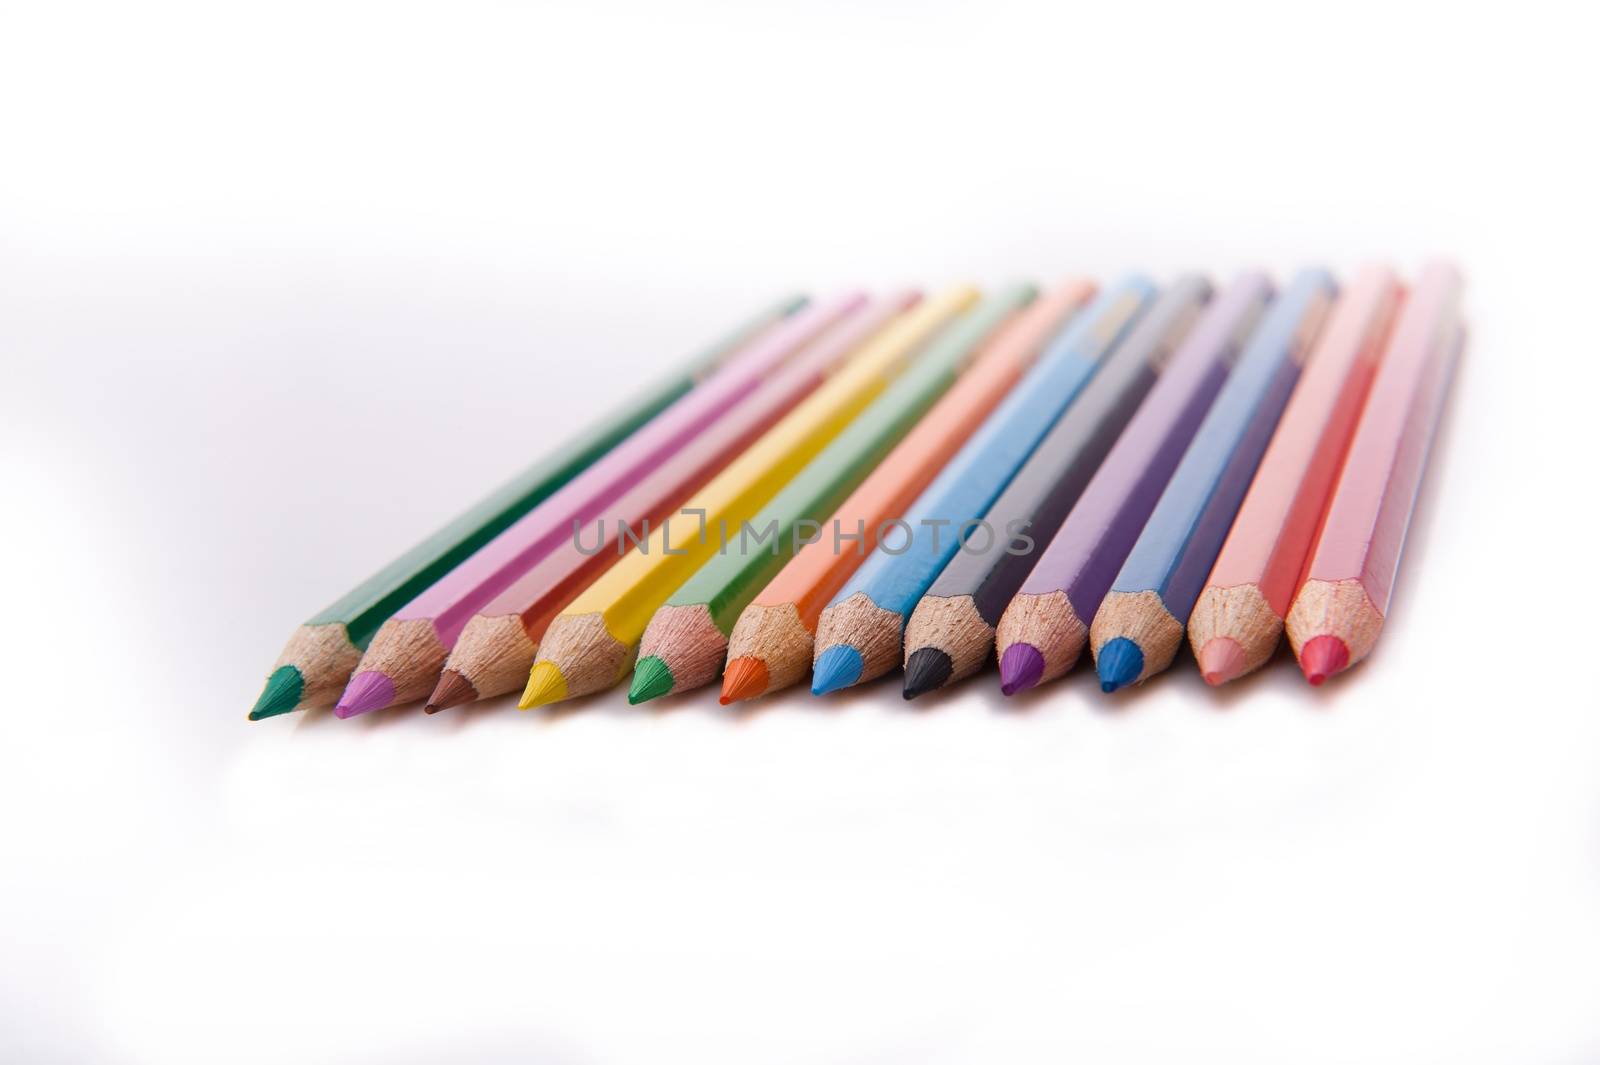 Twelve colored pencils in a row by jetstream4wd